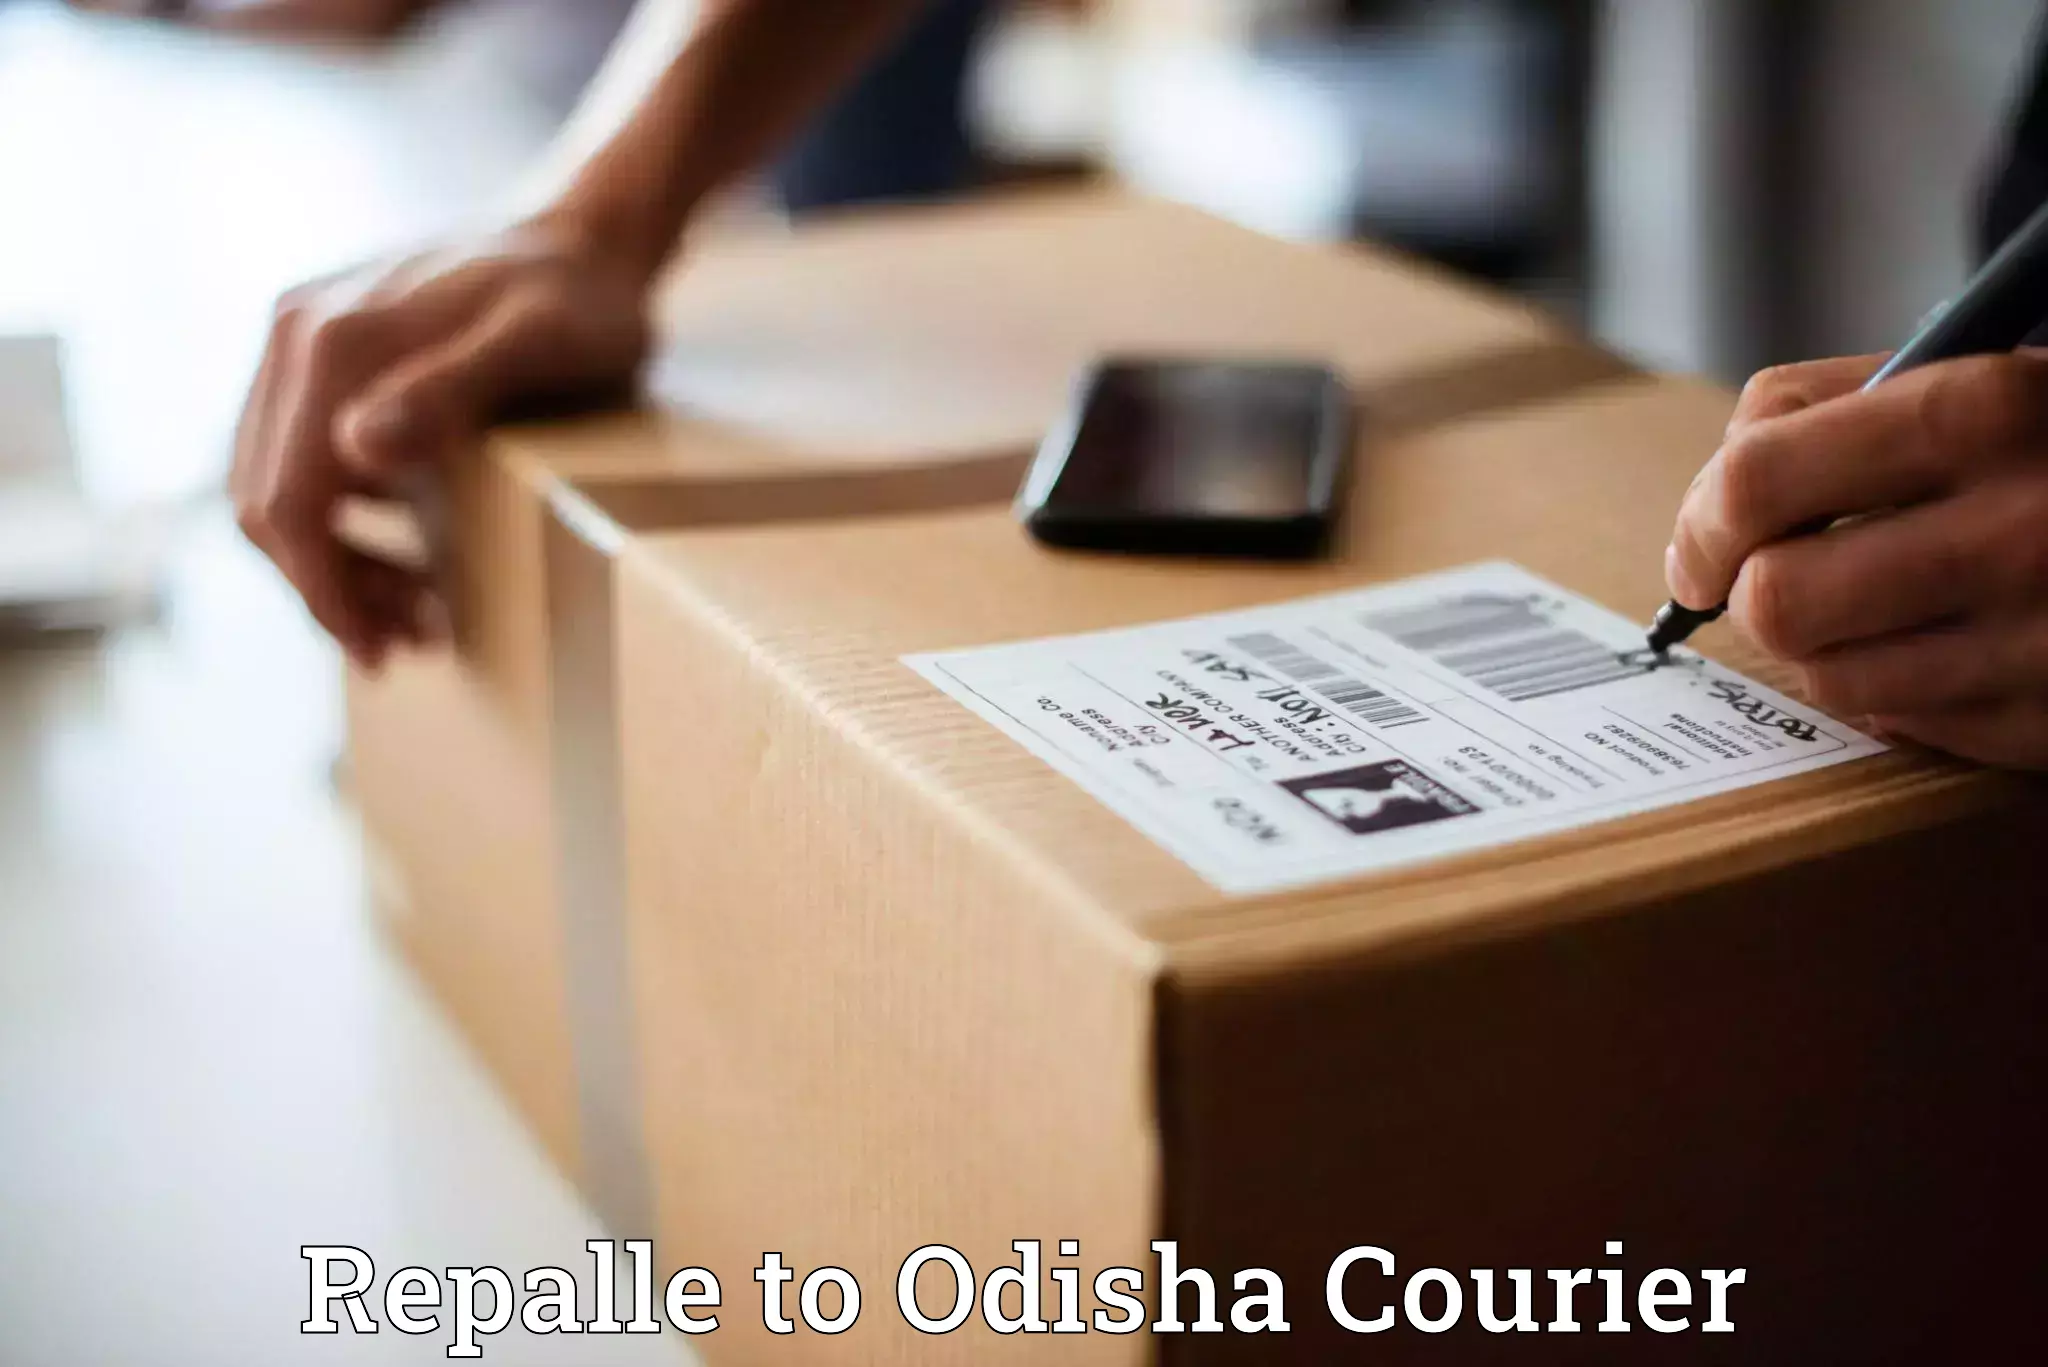 Courier service innovation in Repalle to Sonepur Subarnapur